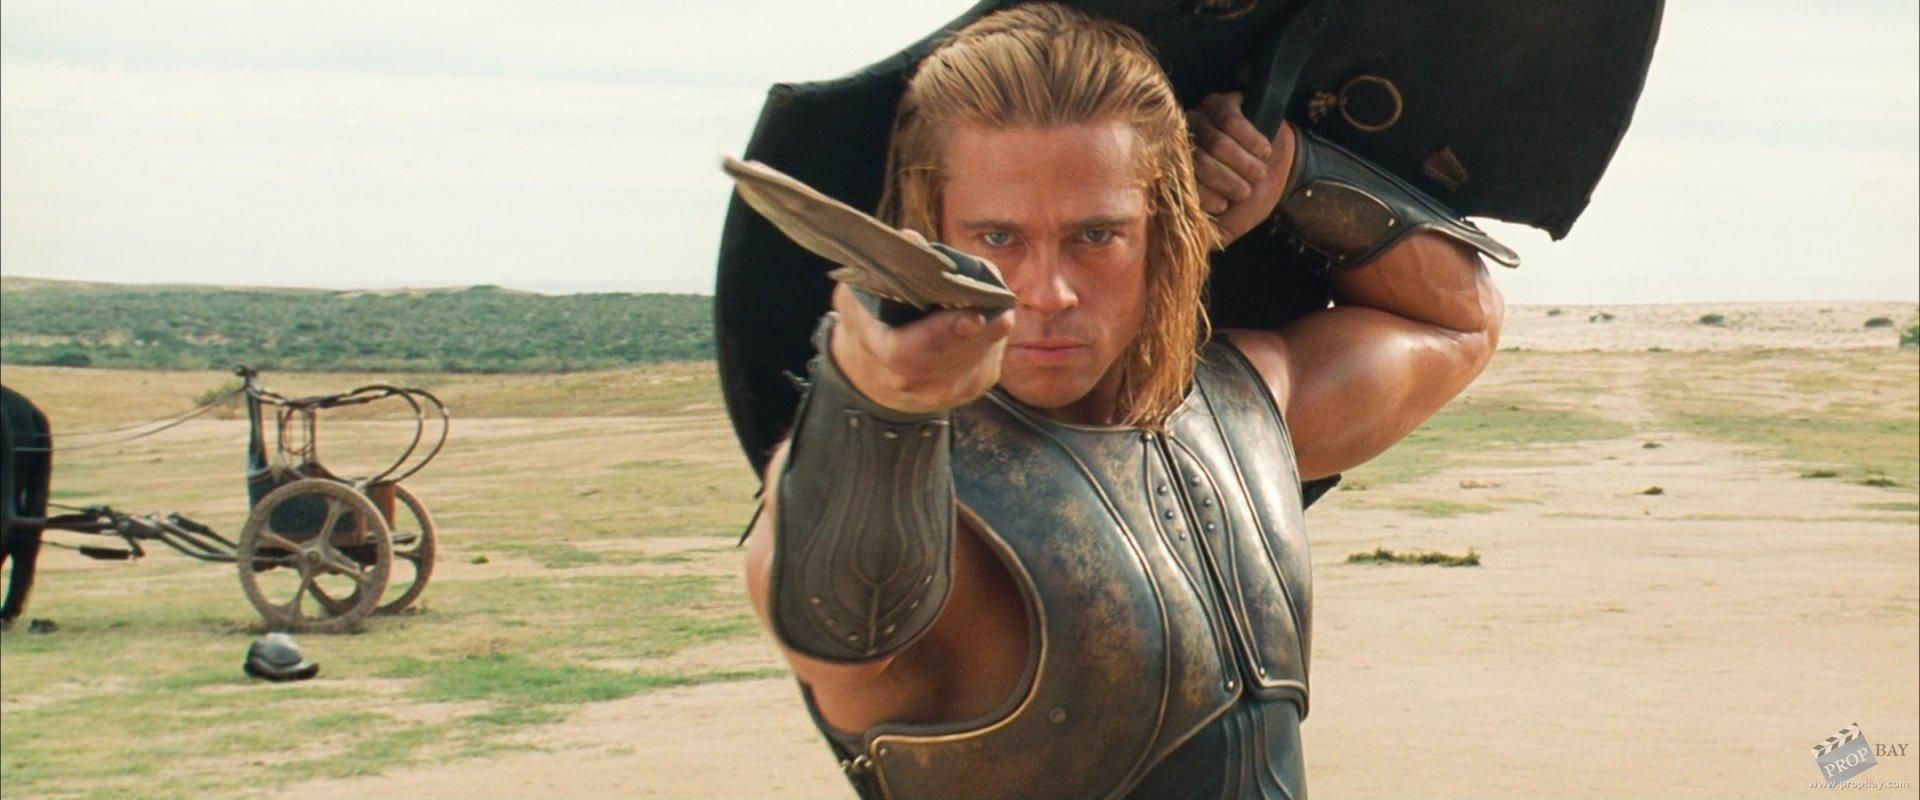 Brad Pitt Vowed To Make Better Movies After Troy It Was Driving Me Crazy